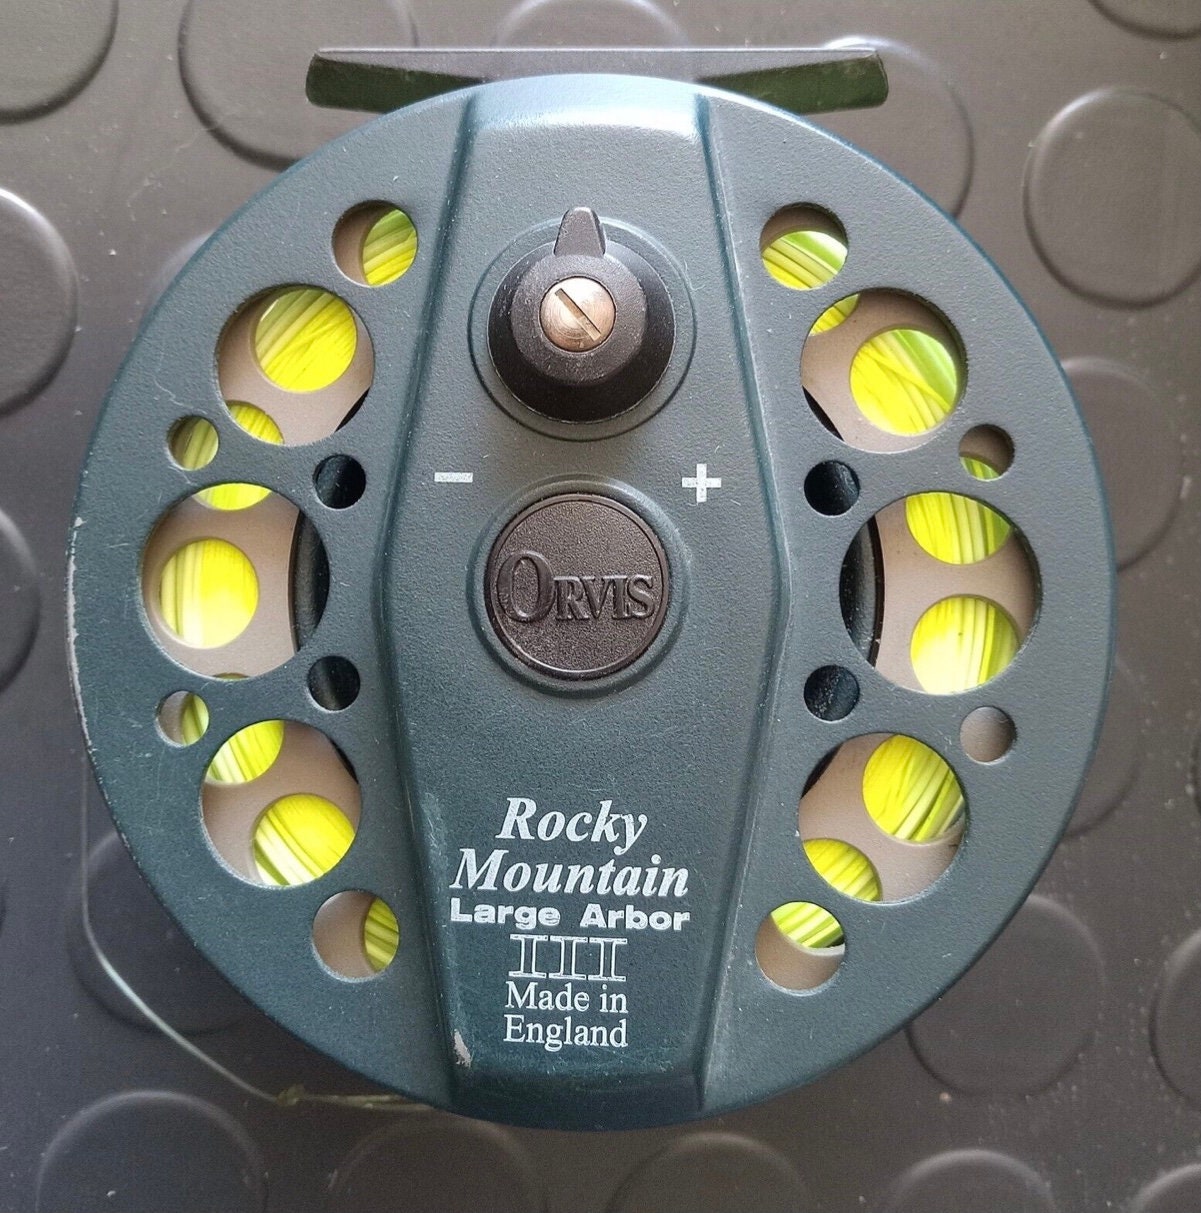 ORVIS ROCKY MOUNTAIN LARGE ARBOR III FLY REEL IN CASE MADE IN